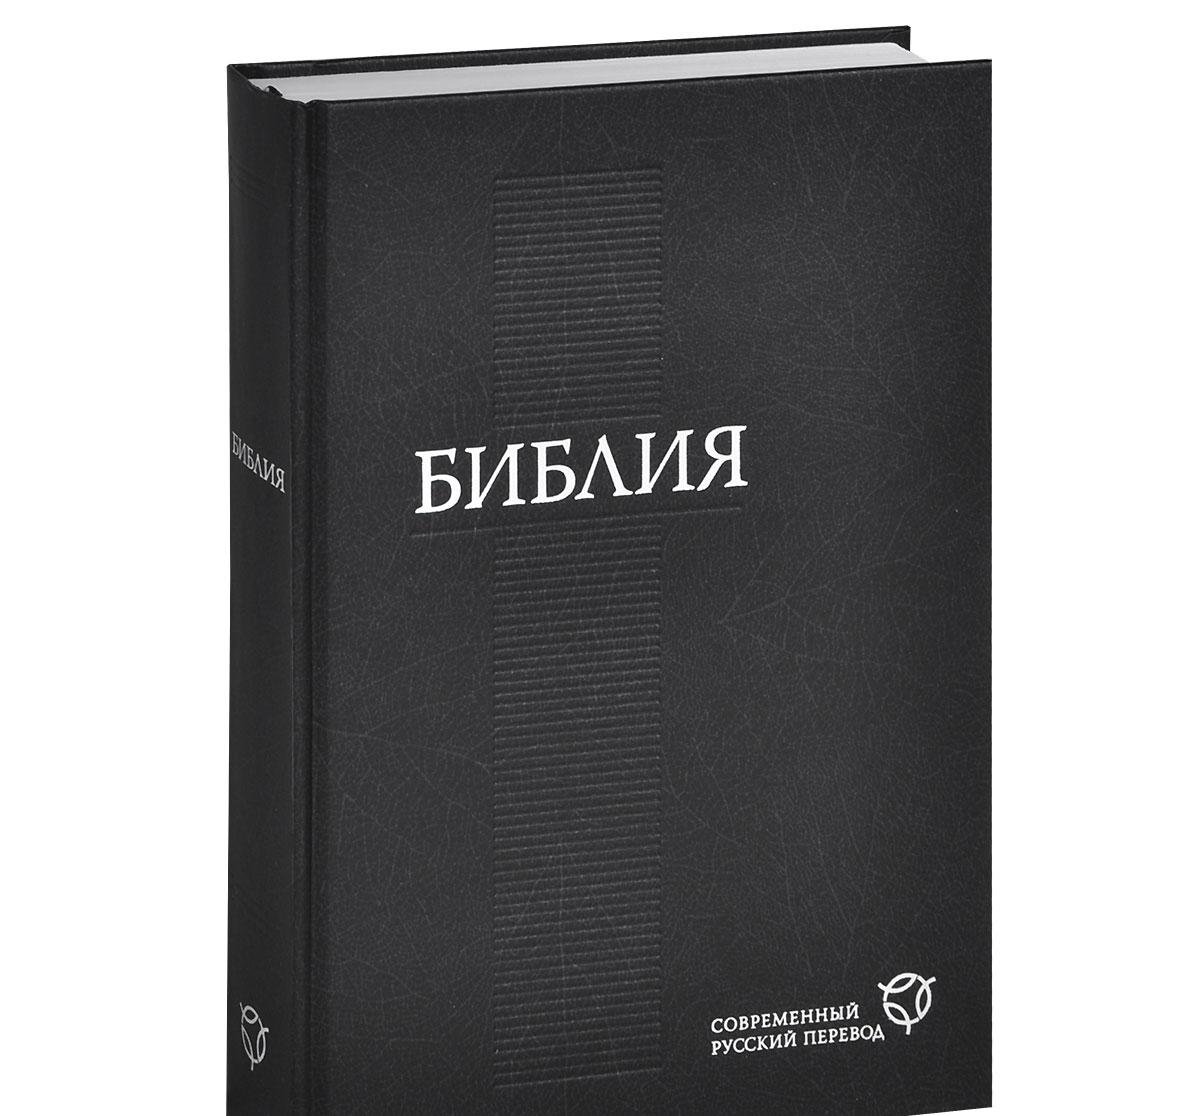 Russian Bible: Old and New Testament - Newest Contemporary Translation in Russian Language